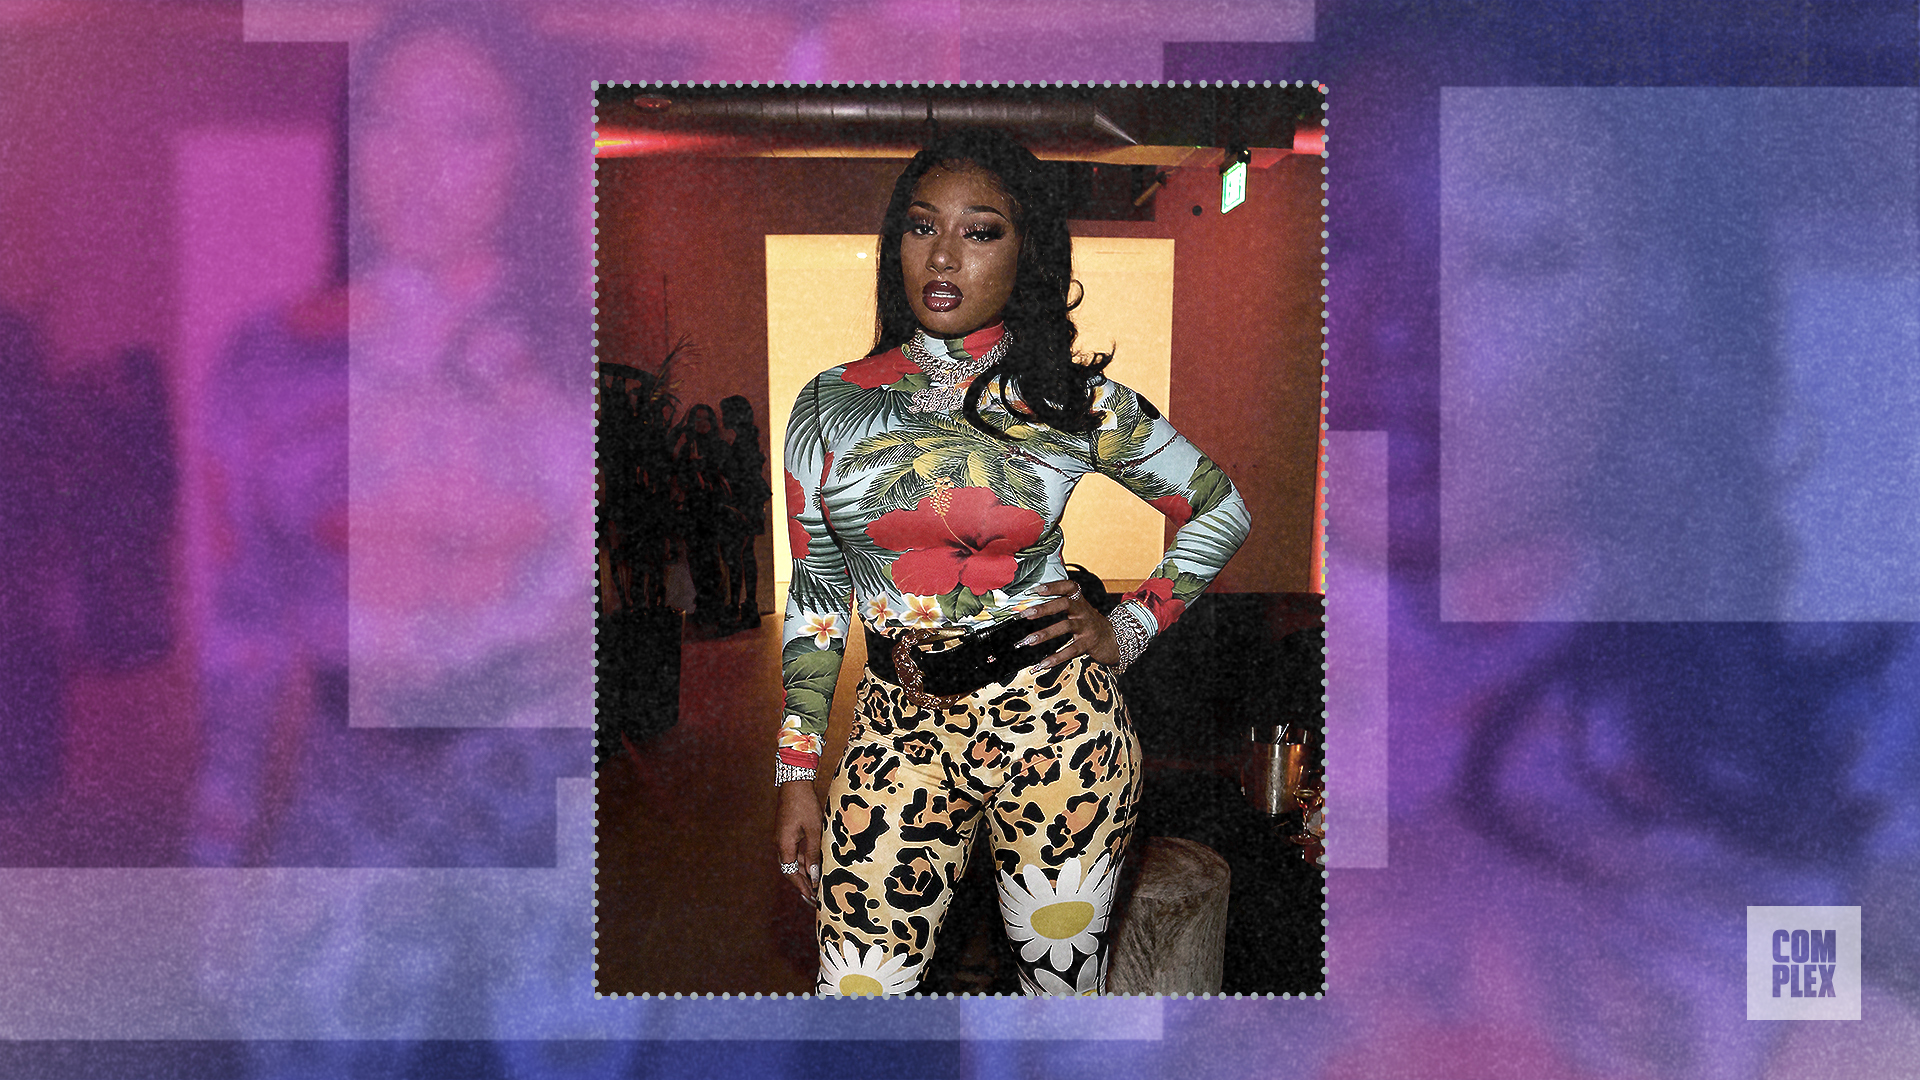 Megan Thee Stallion: Best Rappers in Their 20s